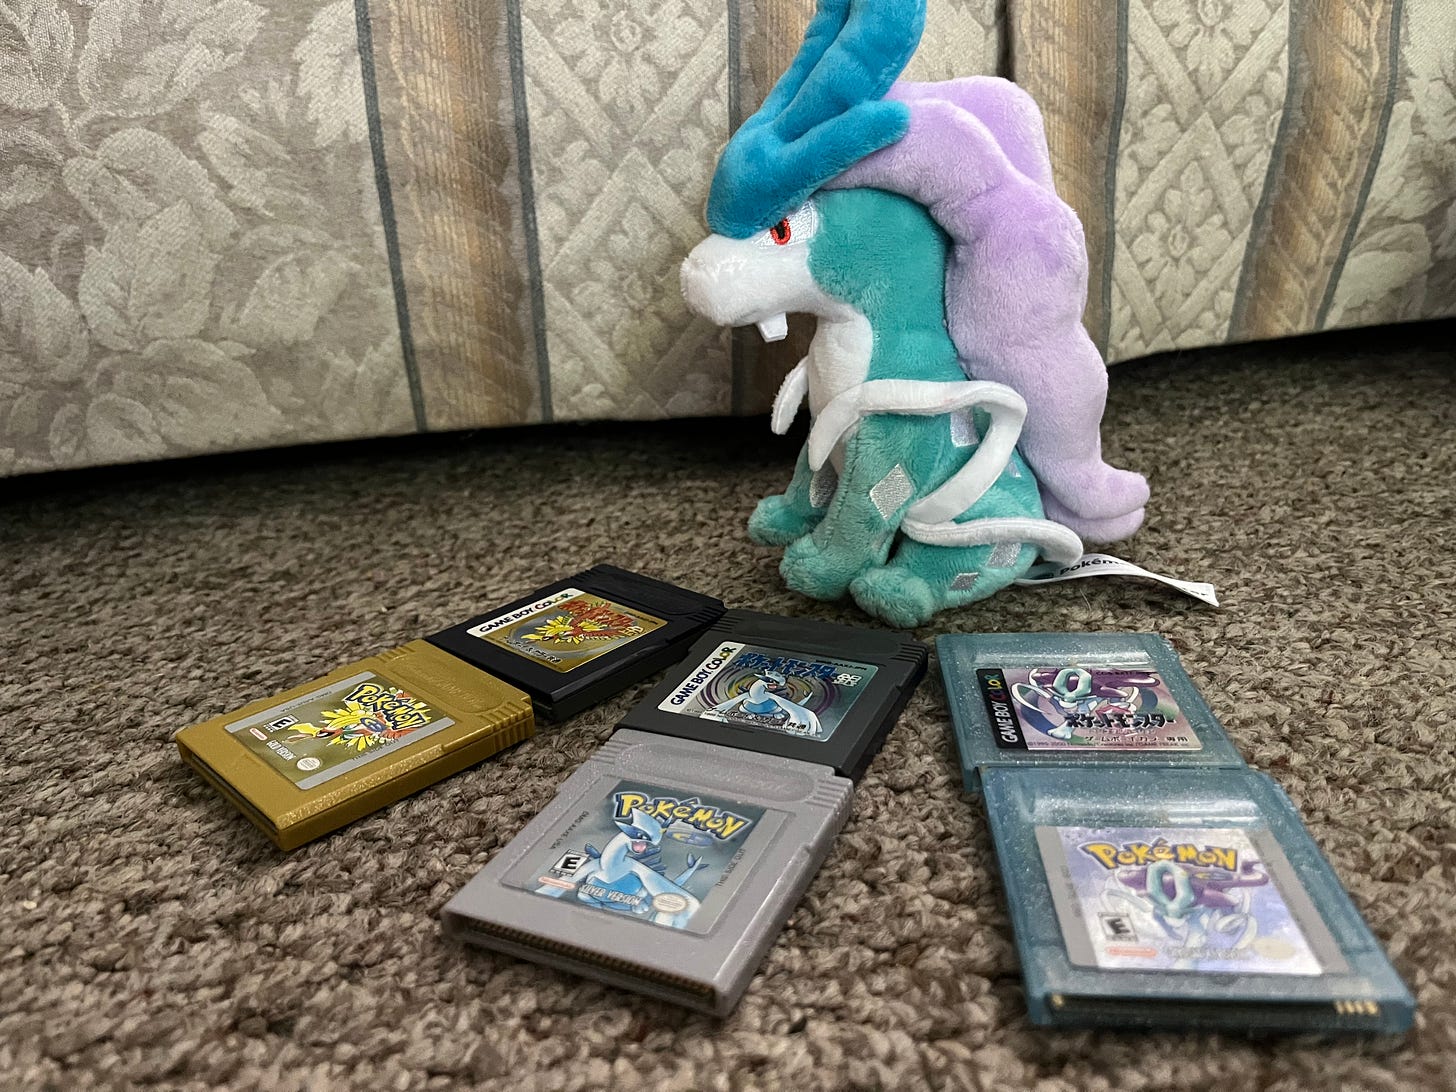 Ayano's awesome Suicune plush, plus her generation 2 games for Game Boy in English and Japanese